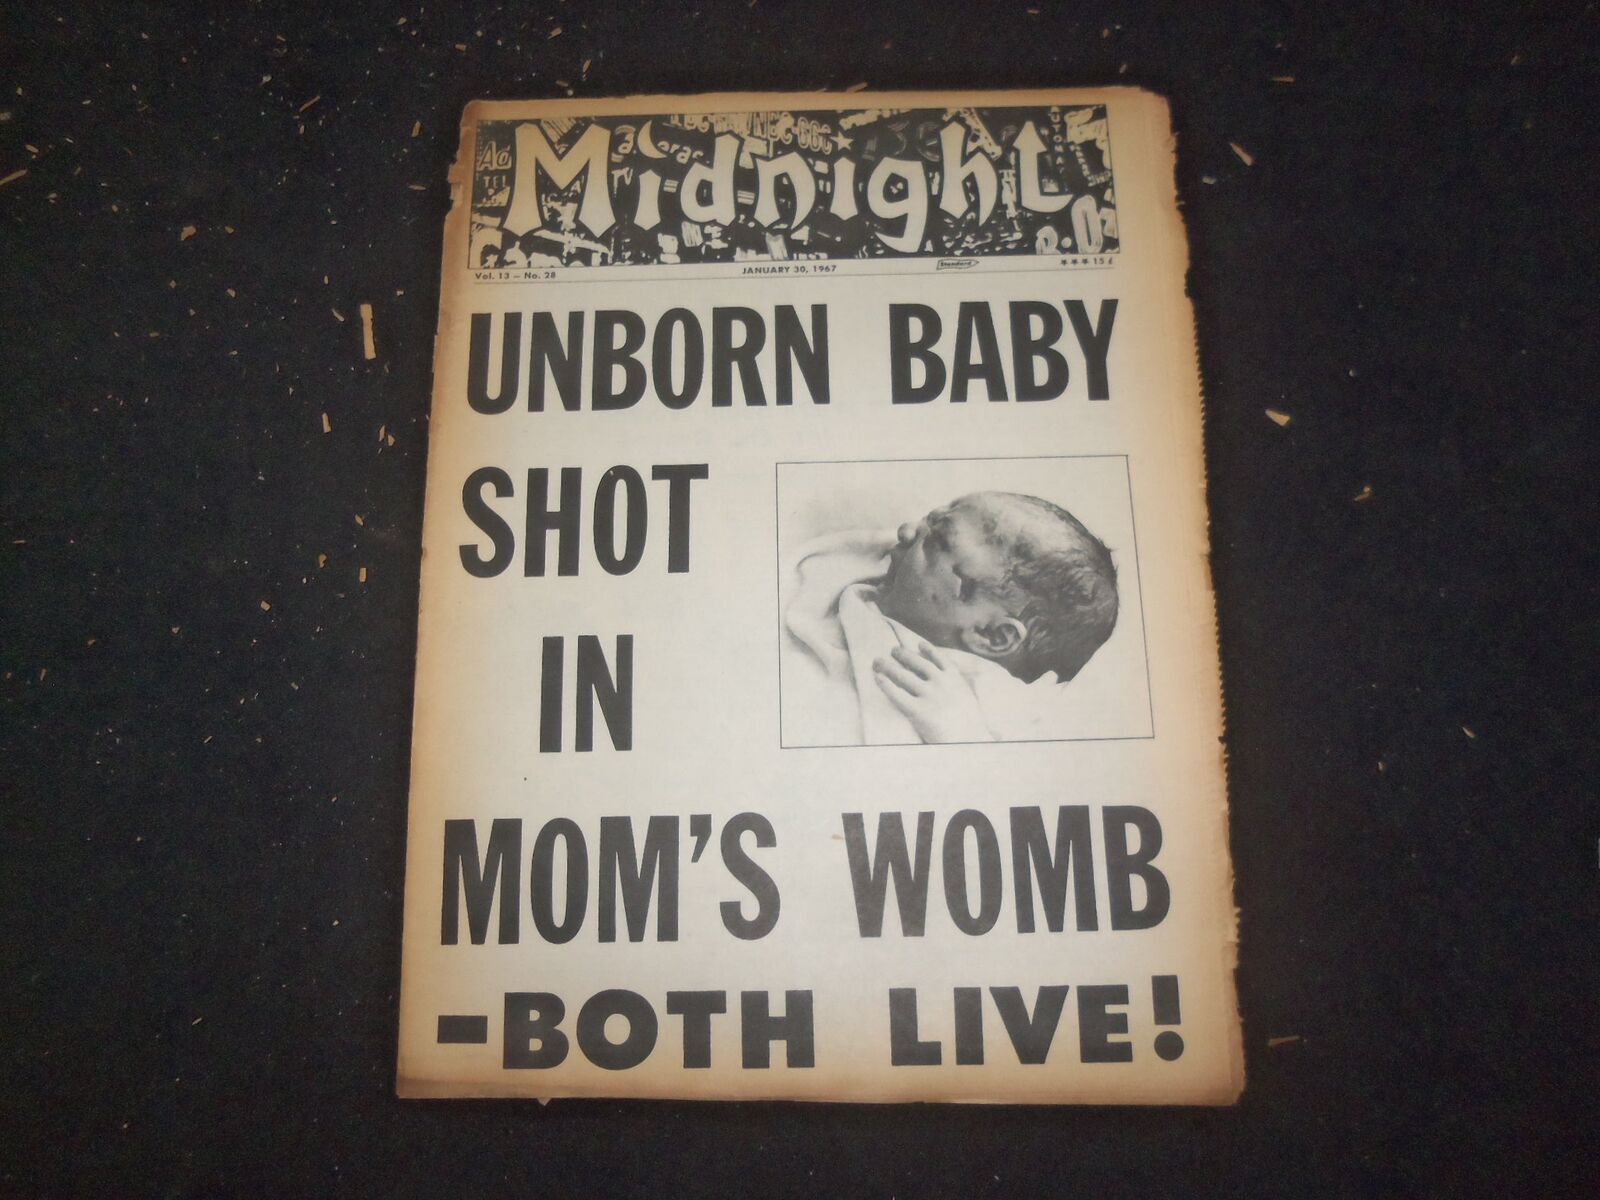 1967 JANUARY 30 MIDNIGHT NEWSPAPER - UNBORN BABY SHOT IN MOM'S WOMB - NP 7375